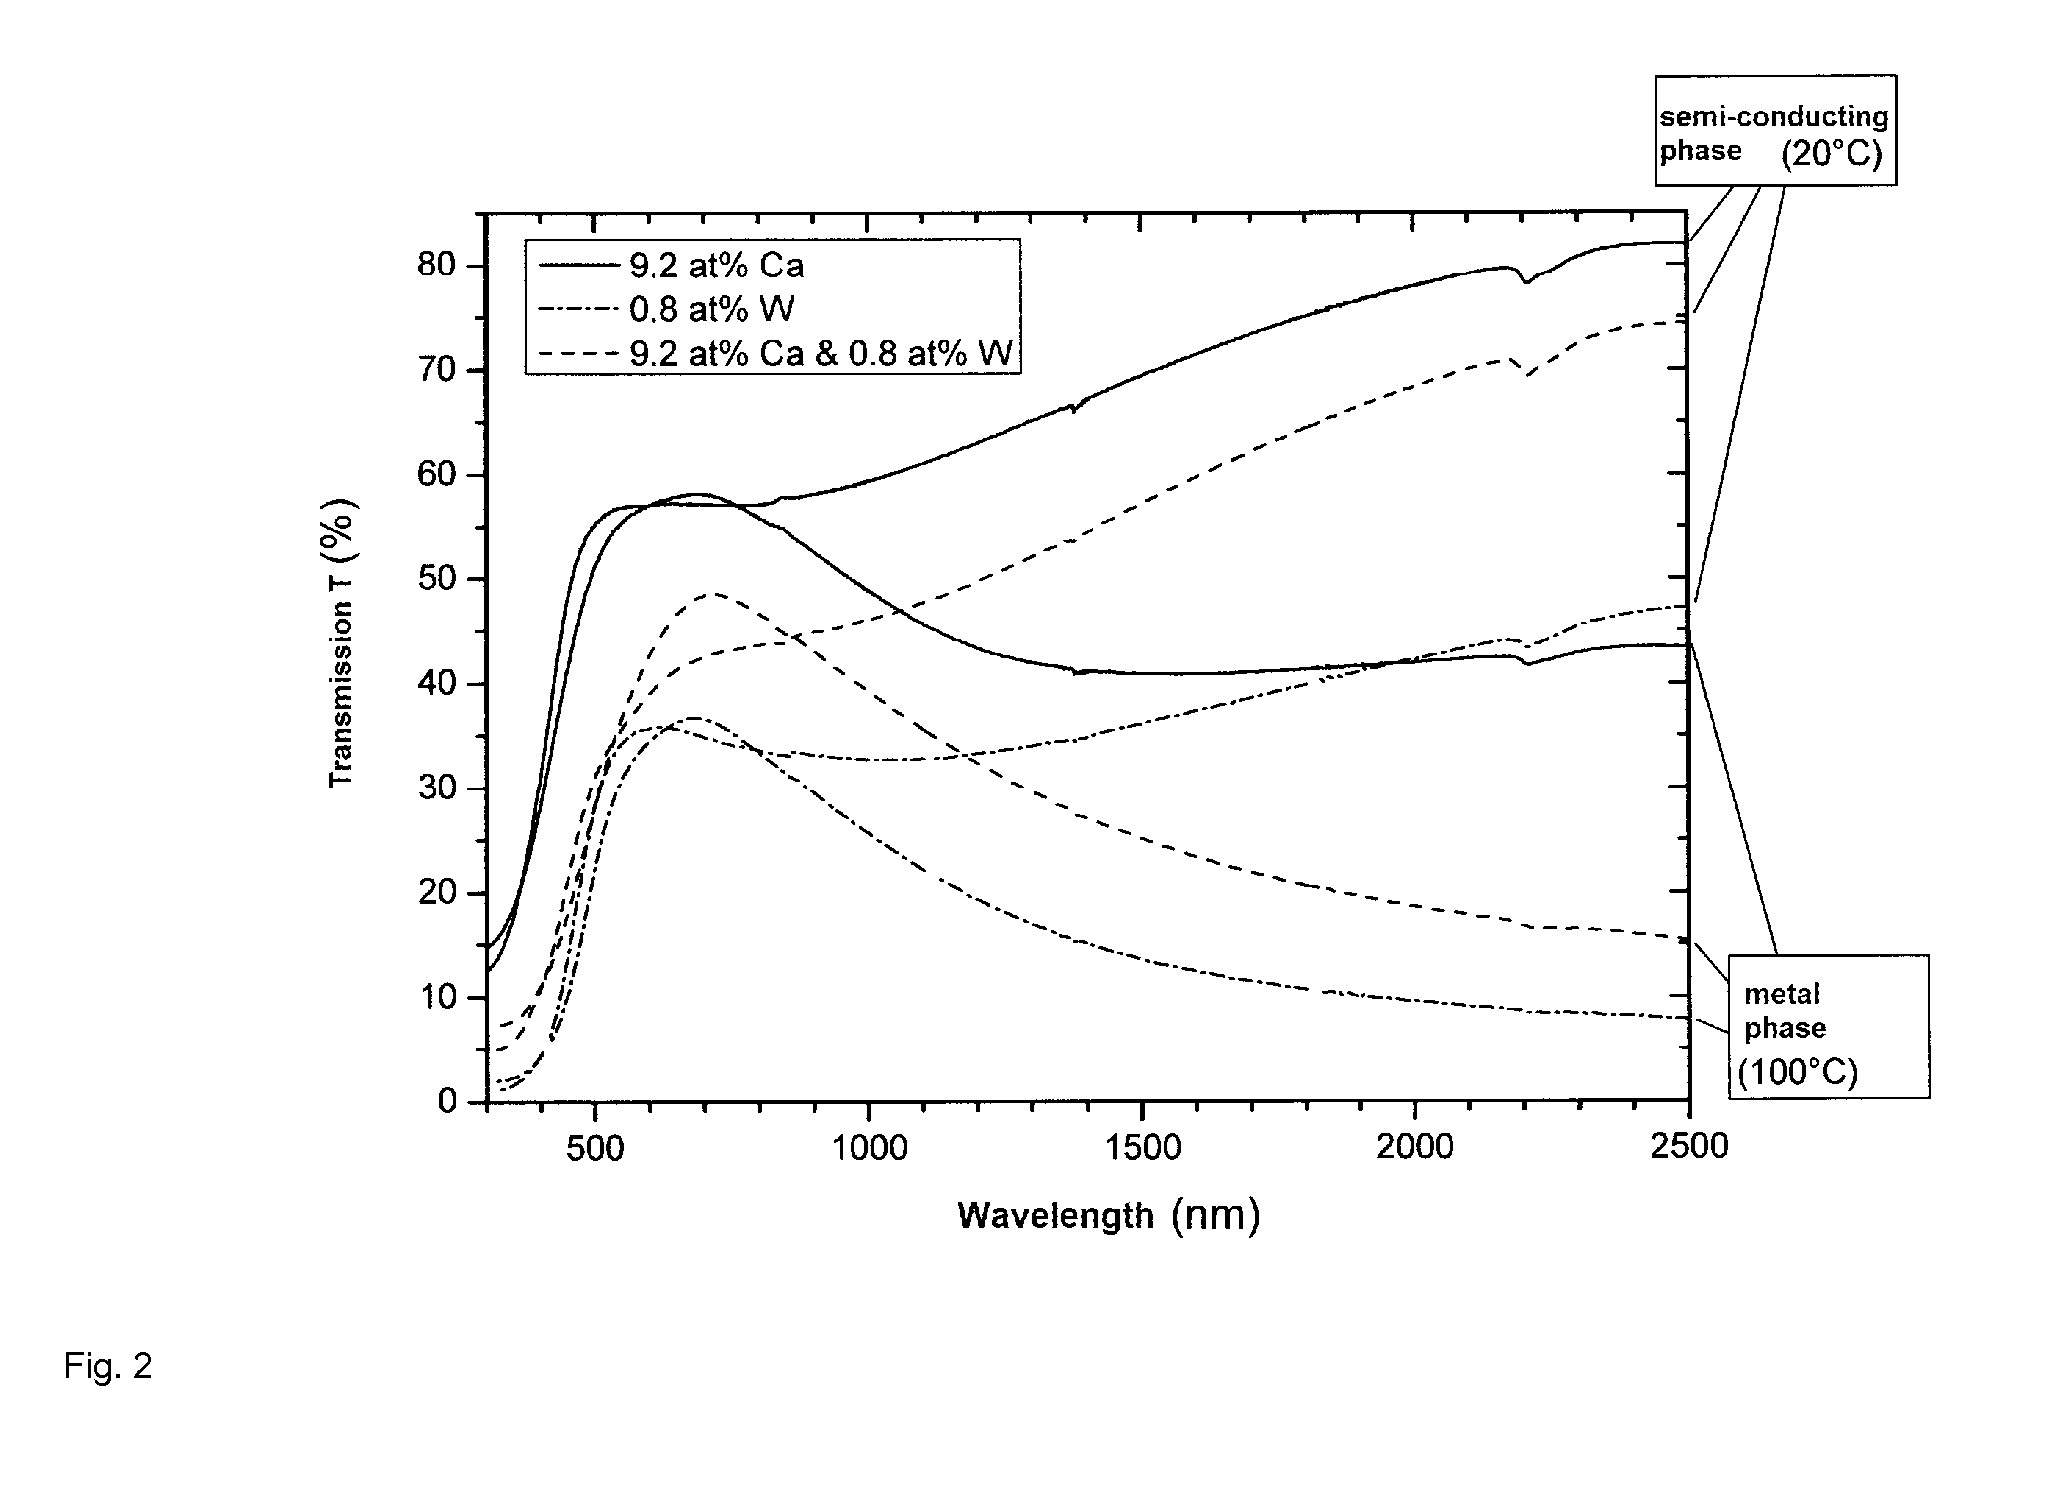 Thermochromic glass comprising a coating of neutral-colour vanadium dioxide